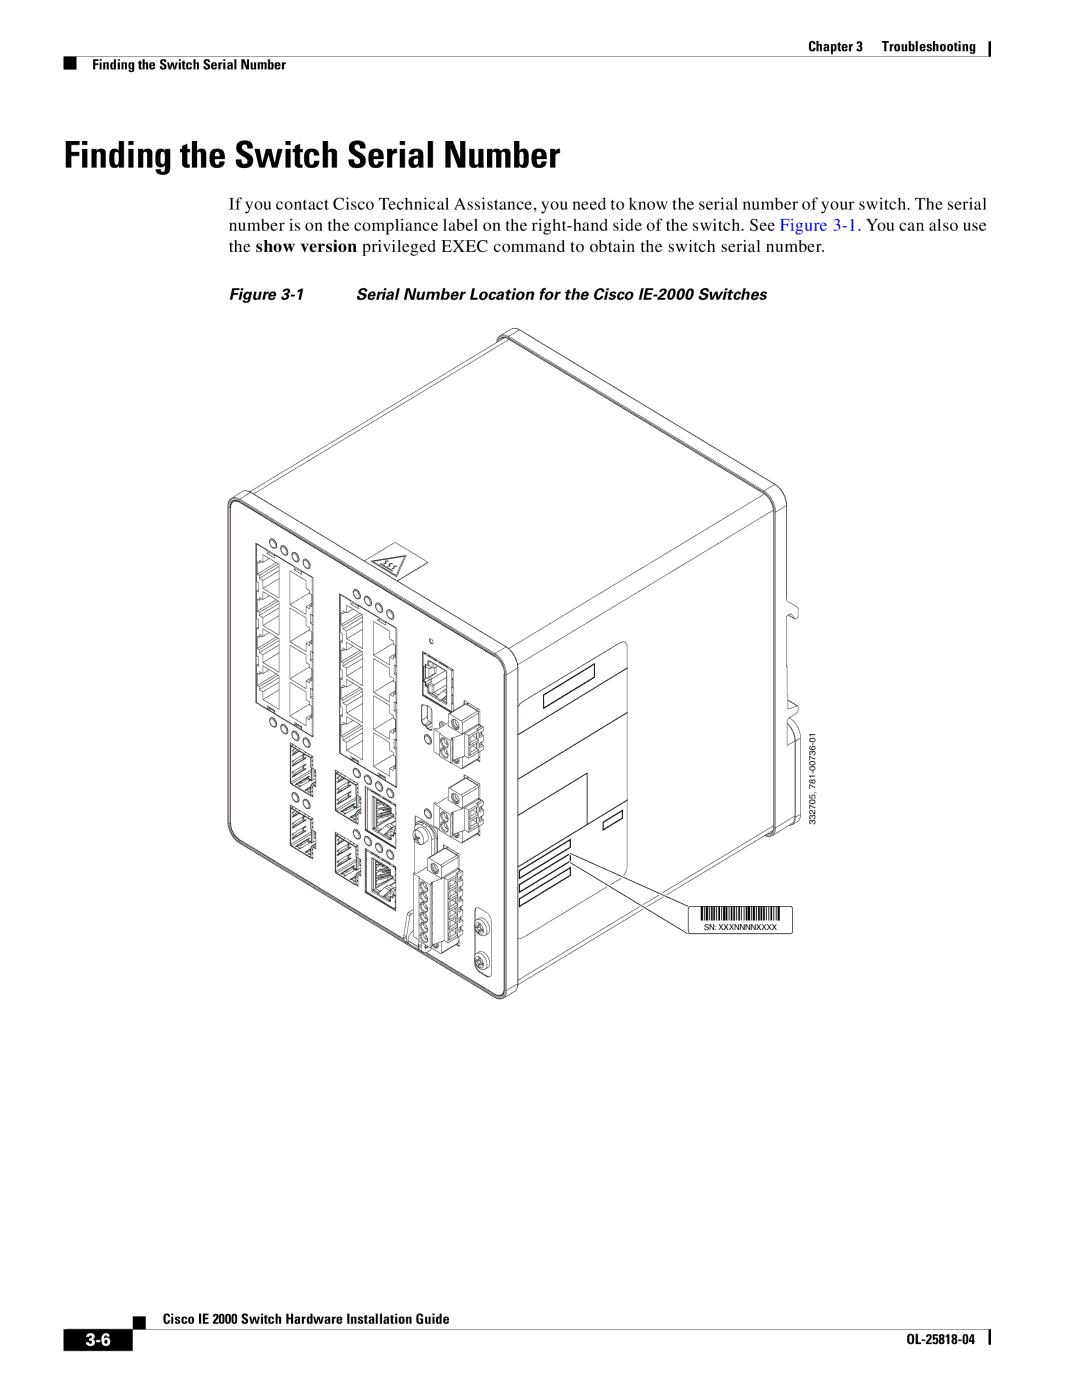 Cisco Systems IE20004TSB manual Finding the Switch Serial Number, Serial Number Location for the Cisco IE-2000 Switches 